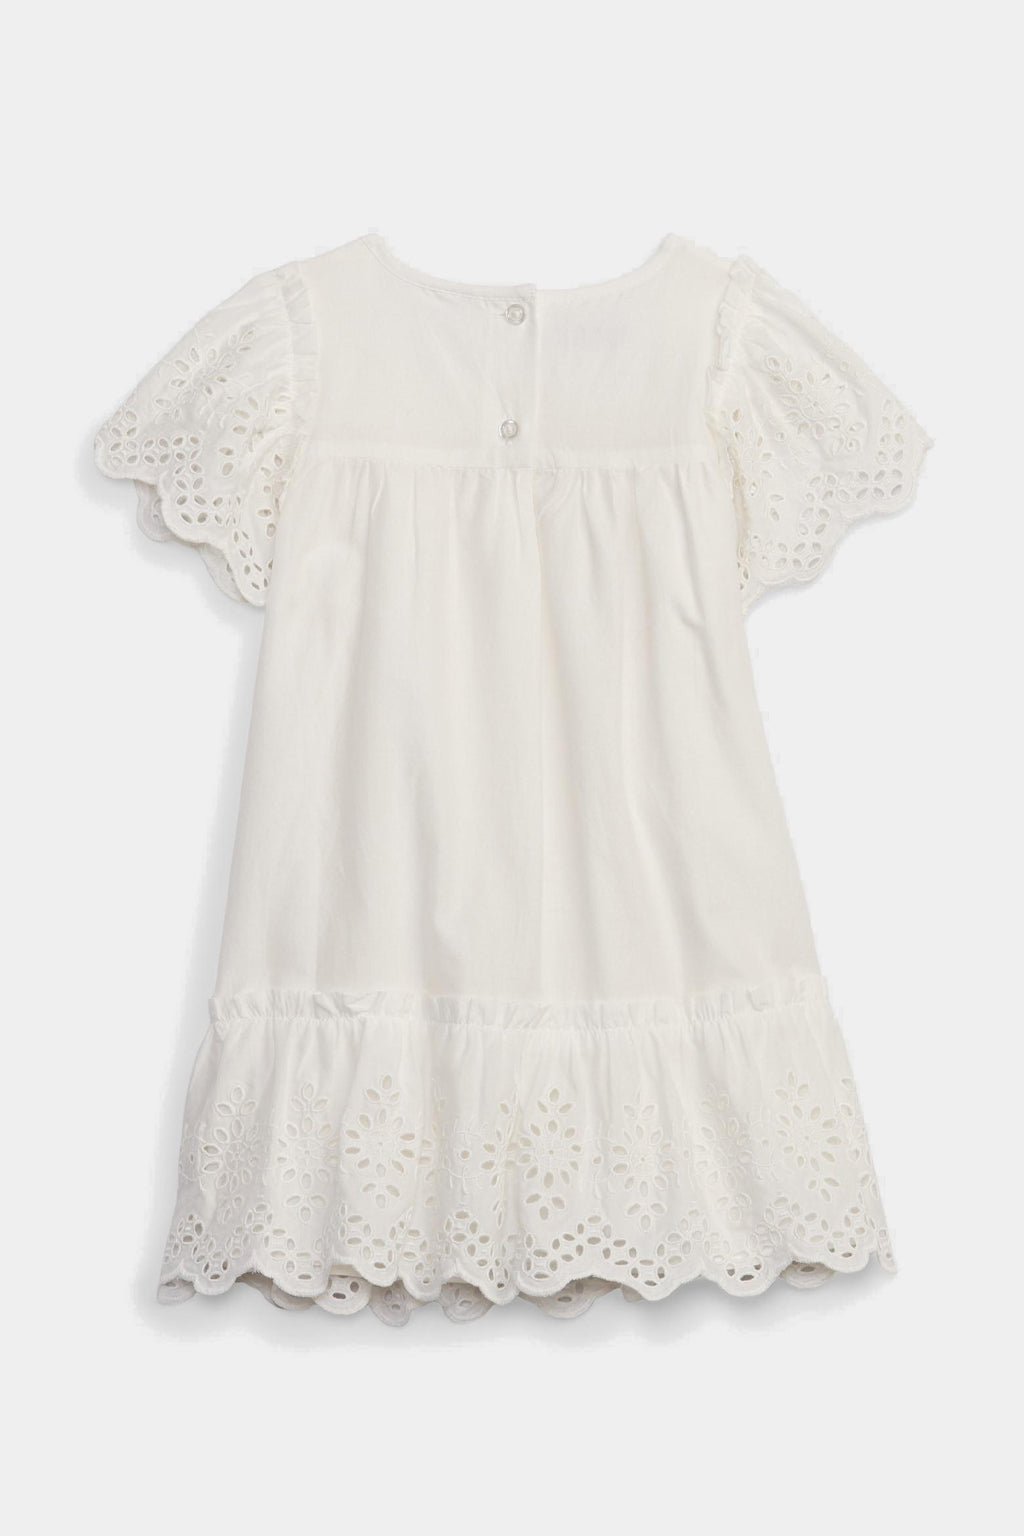 Gap - Baby Layered dress with English embroidery